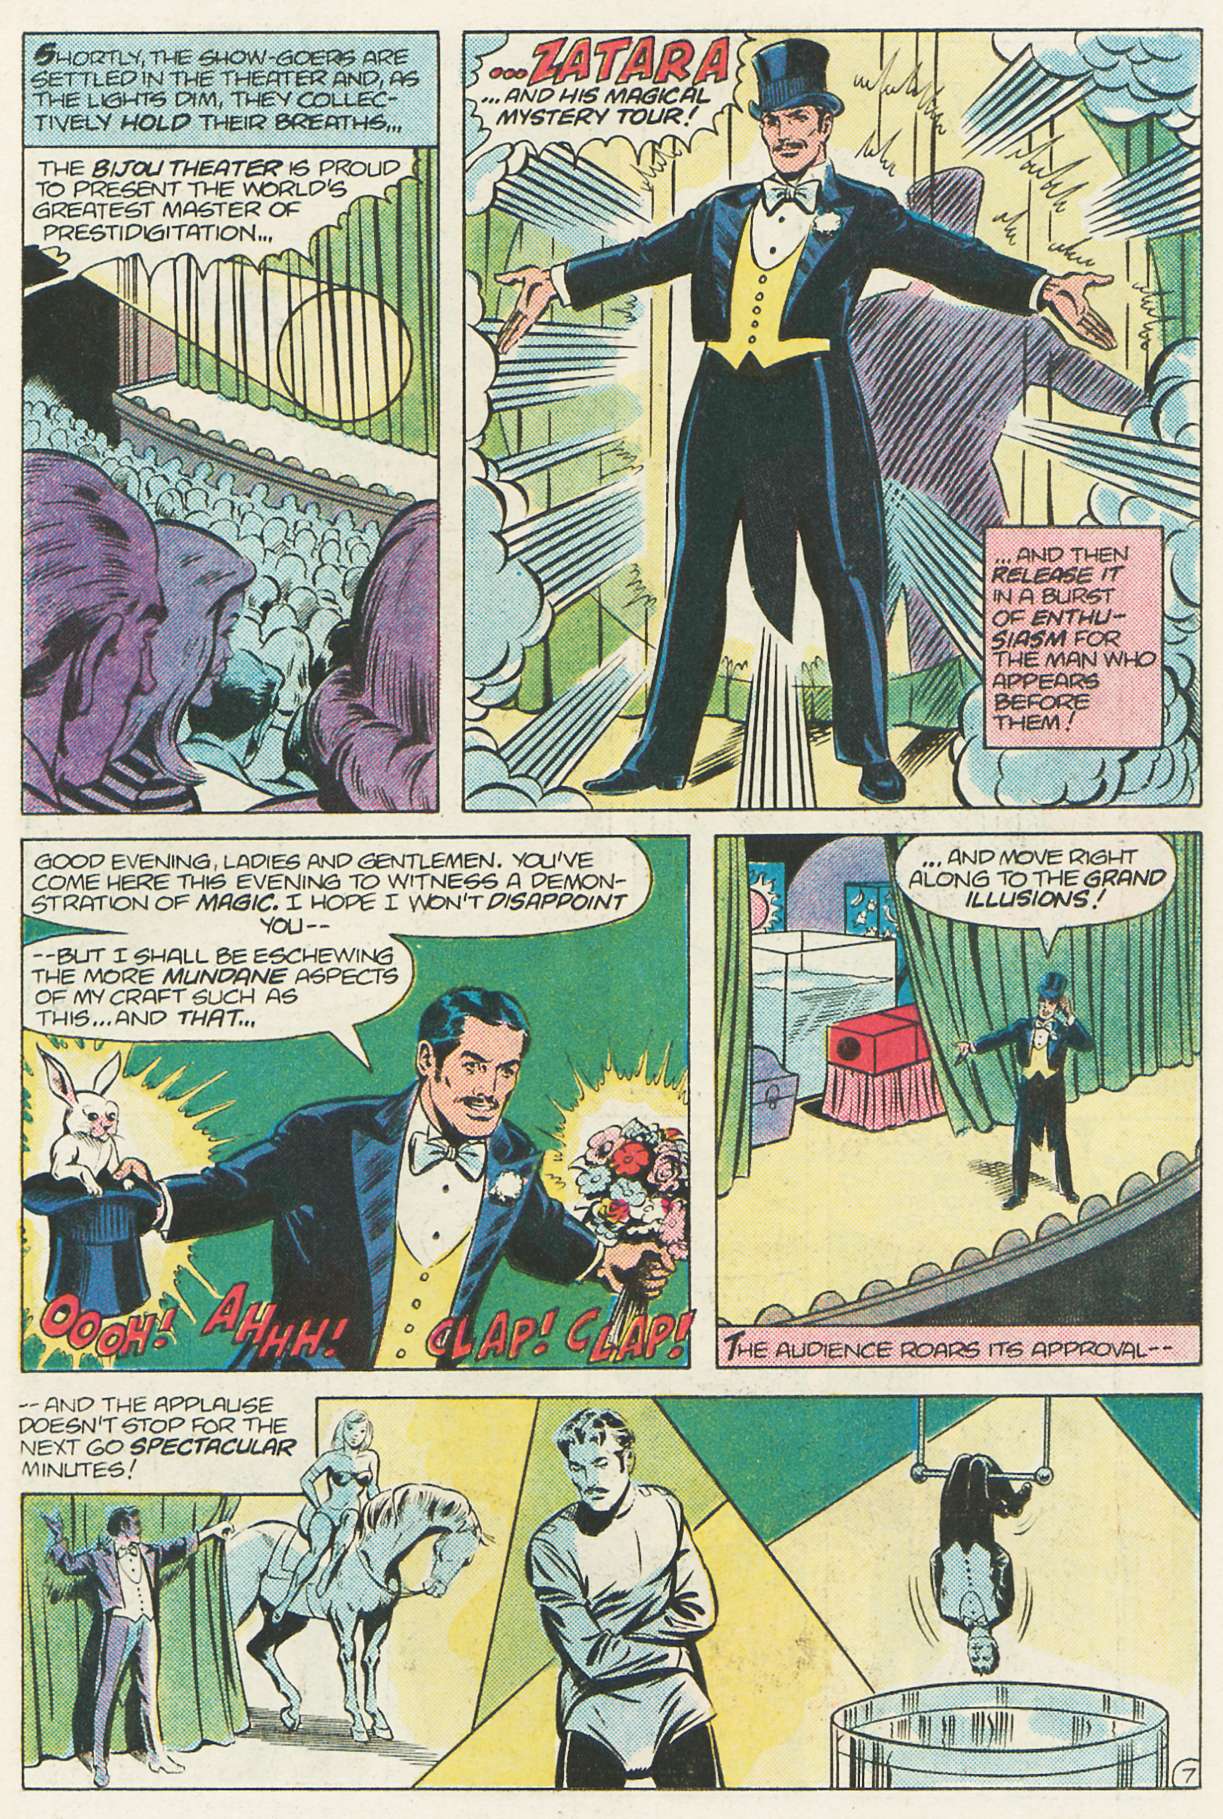 The New Adventures of Superboy 49 Page 7